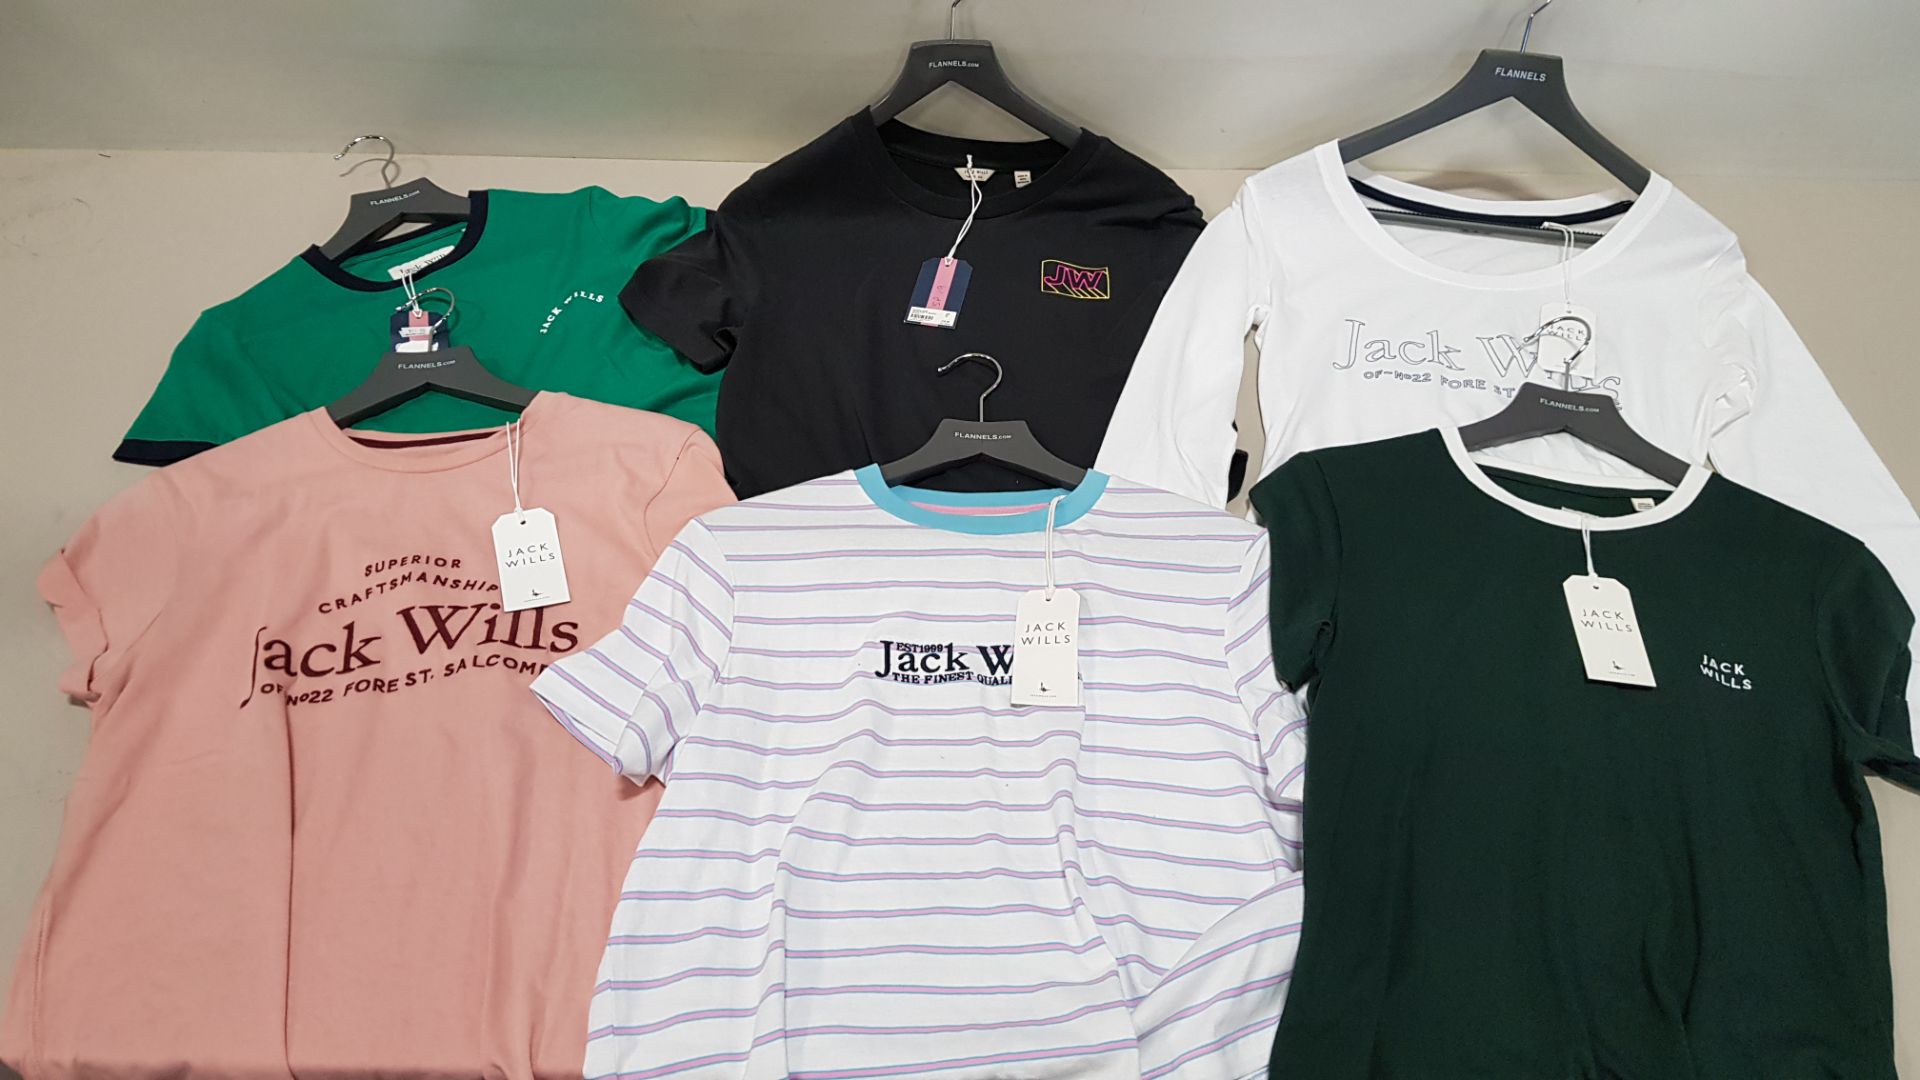 10 PIECE MIXED JACK WILLS CLOTHING LOT IN VARIOUS SIZES CONTAINING CREWNECK T SHIRTS IN VARIOUS